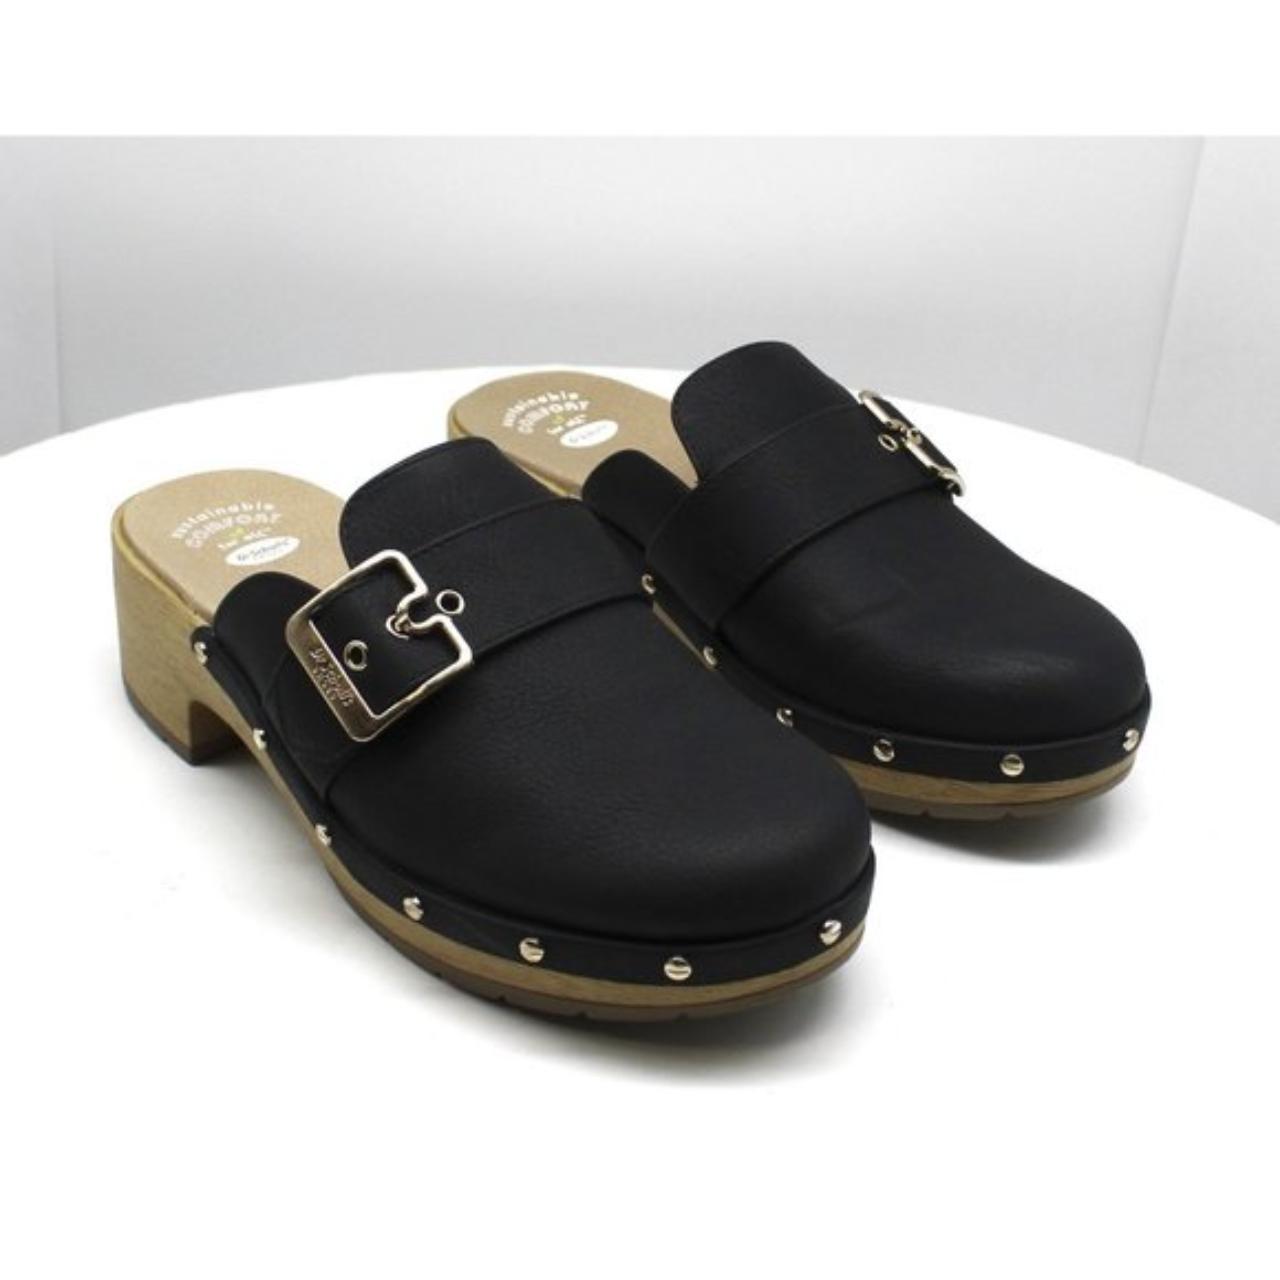 Product Image 1 - Dr. Scholl's Women's Classic Clog